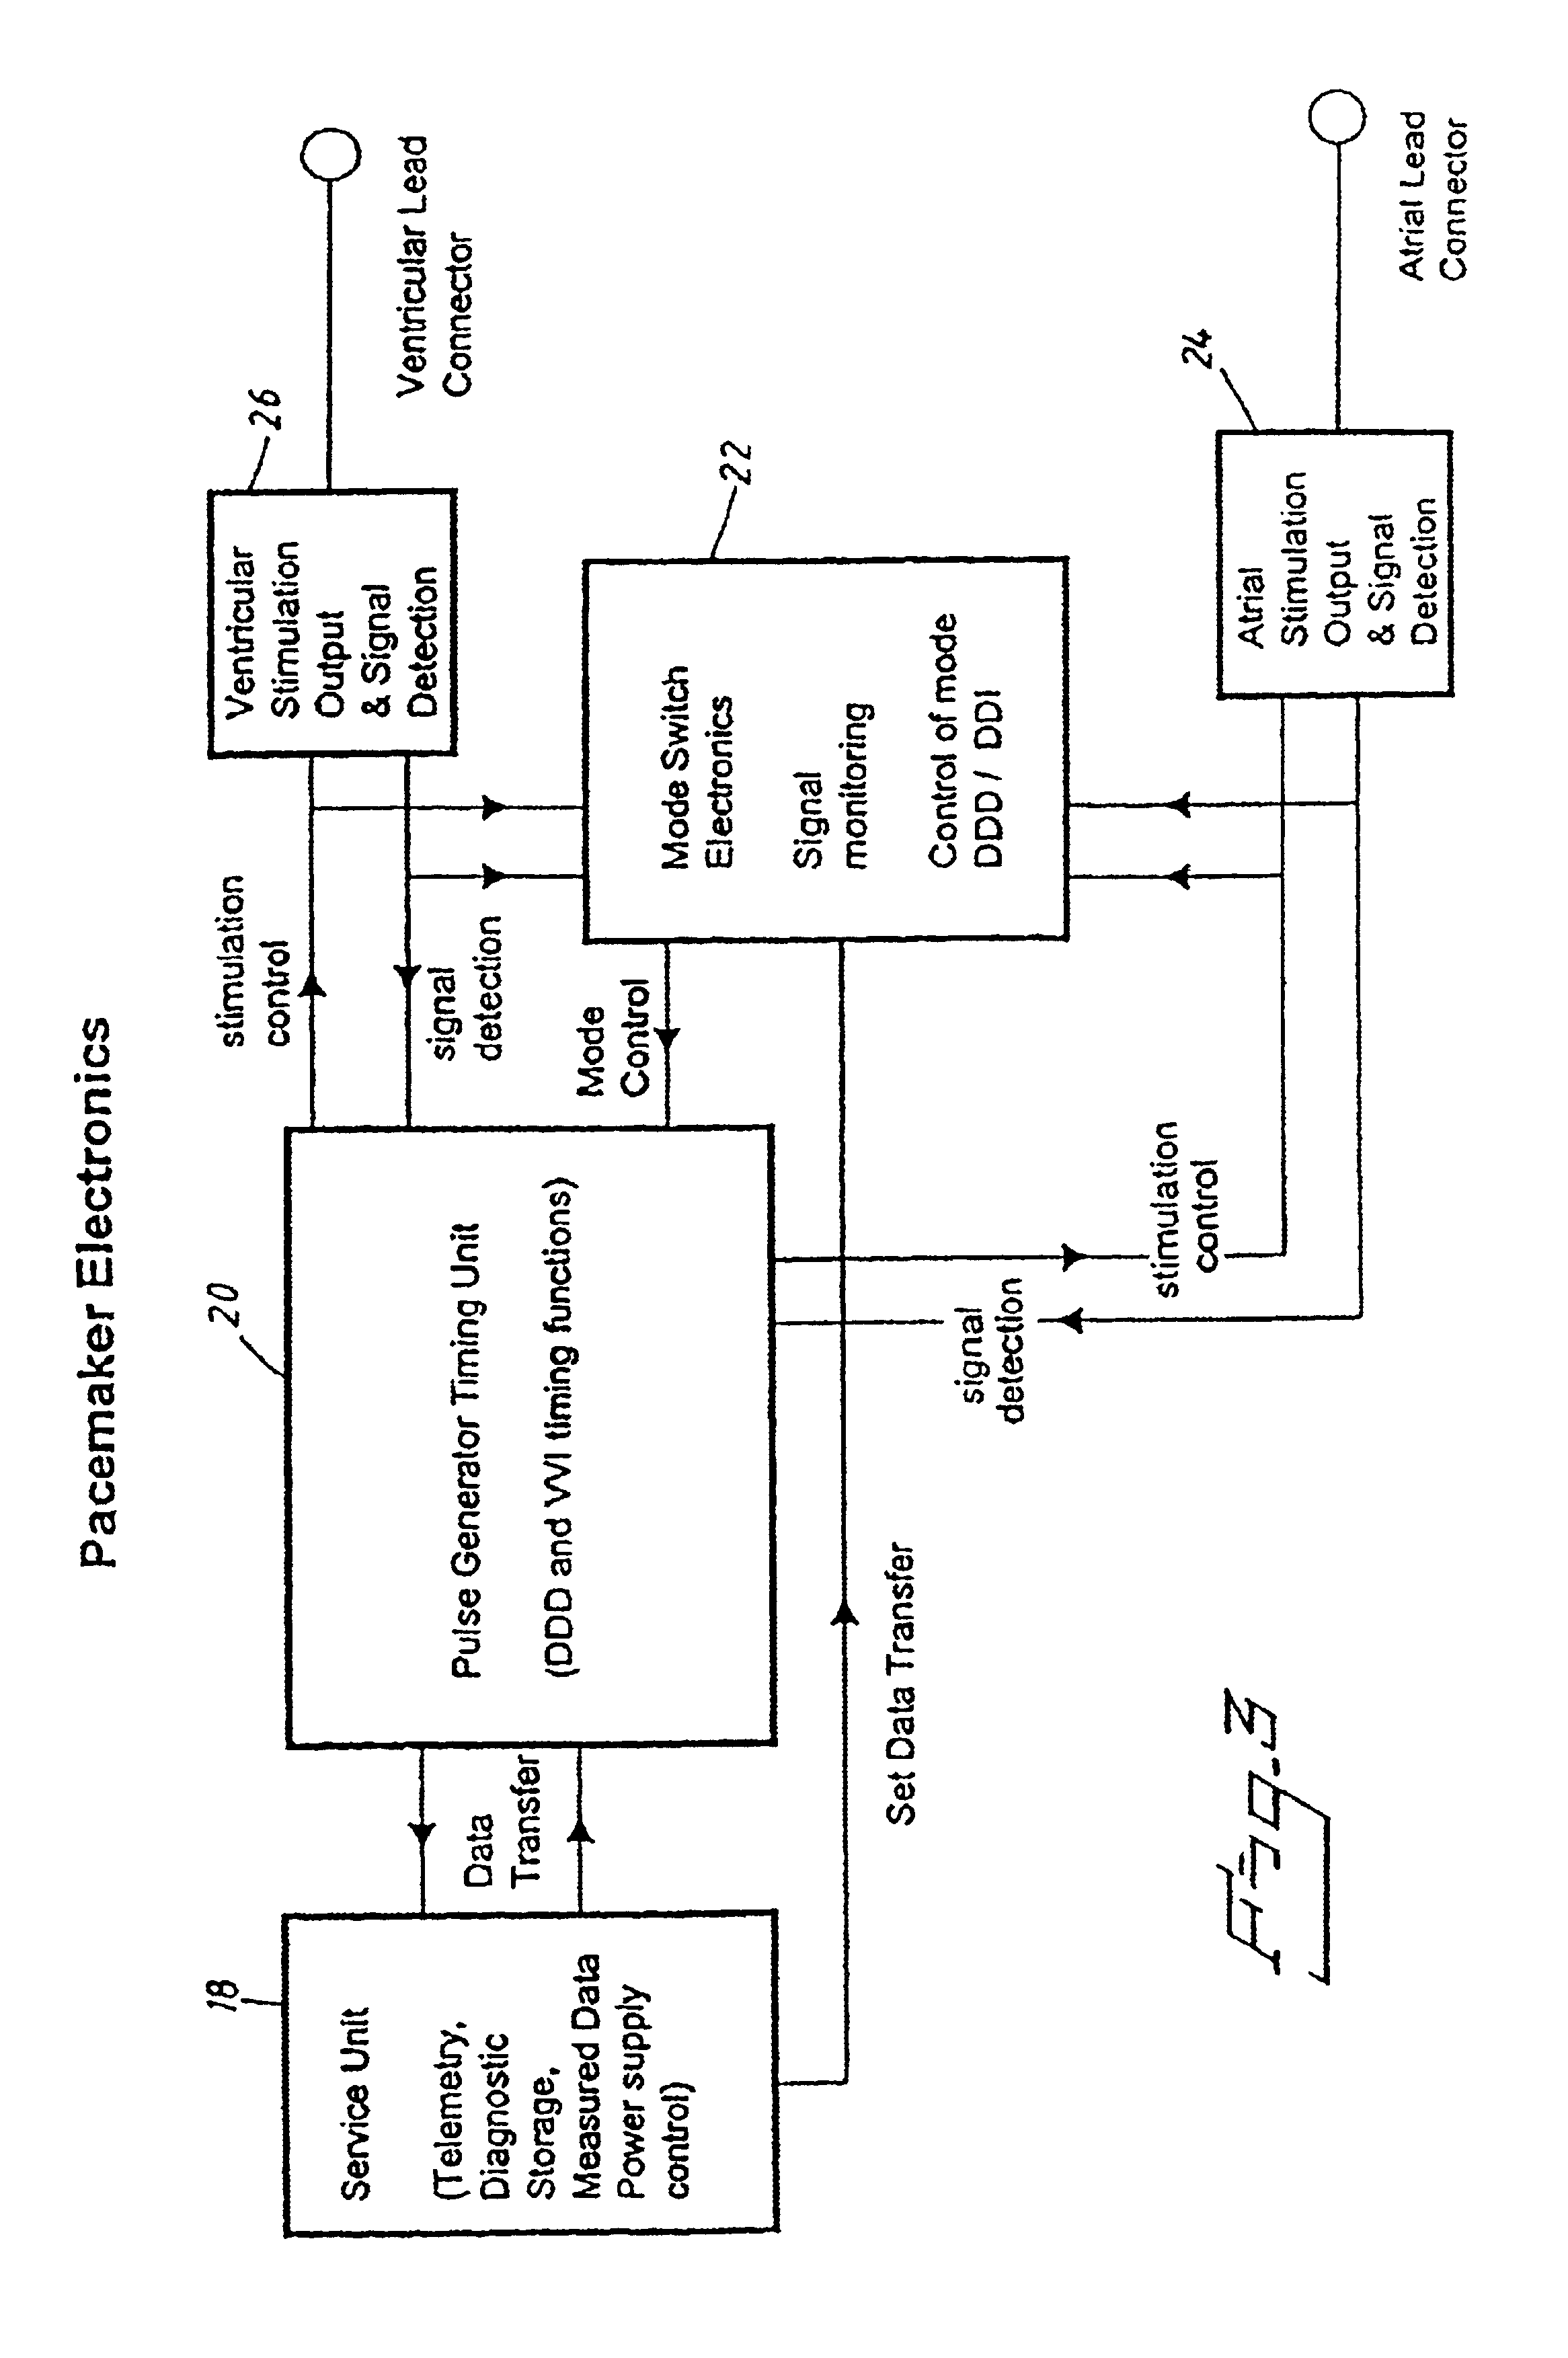 Pacemaker using measured intervals for mode switching